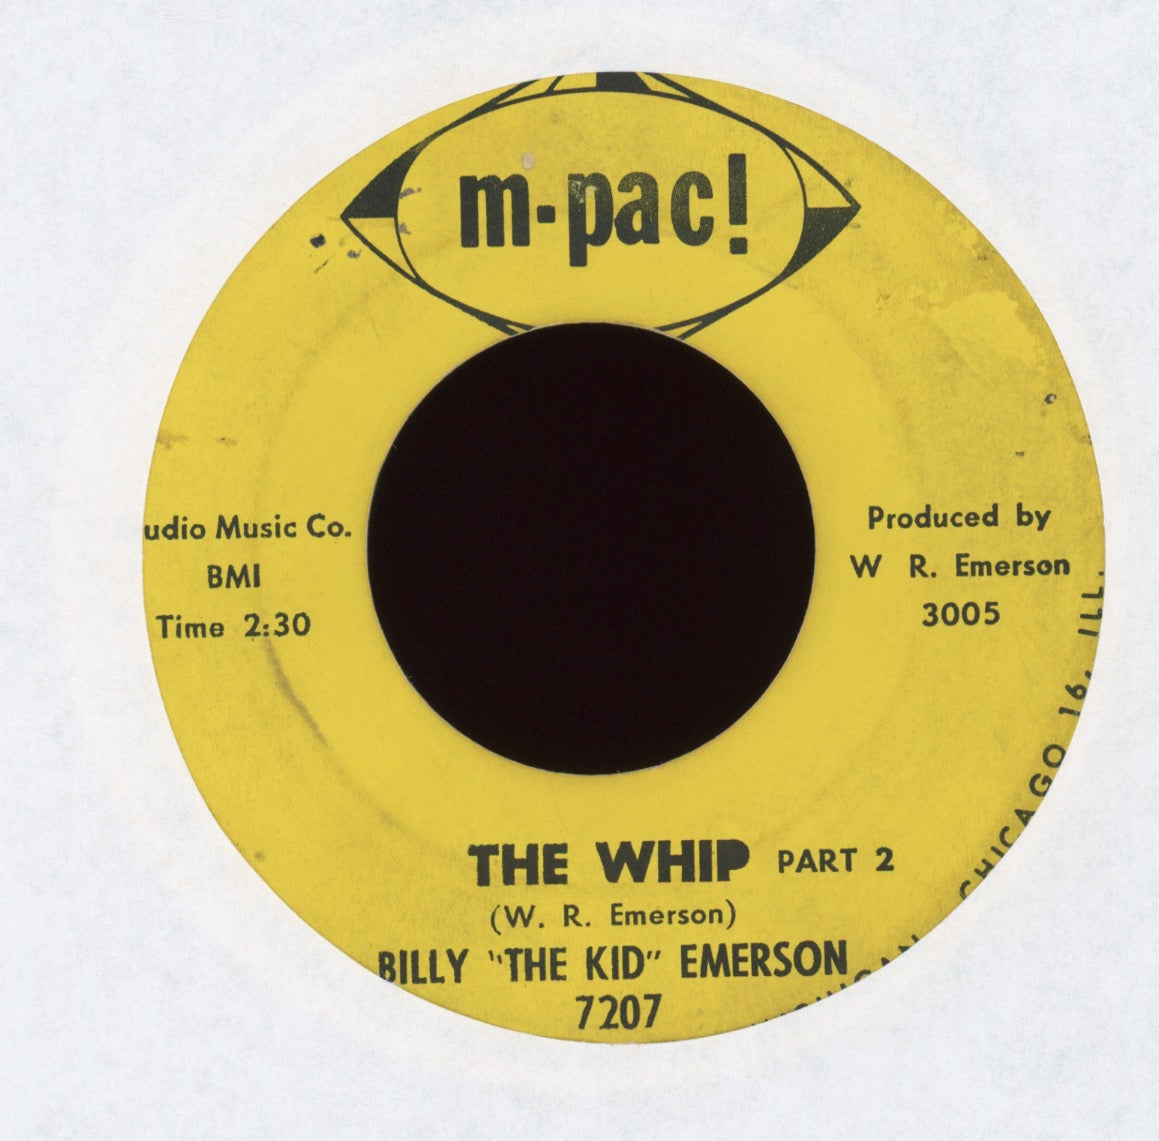 Billy Emerson - The Whip on M-Pac